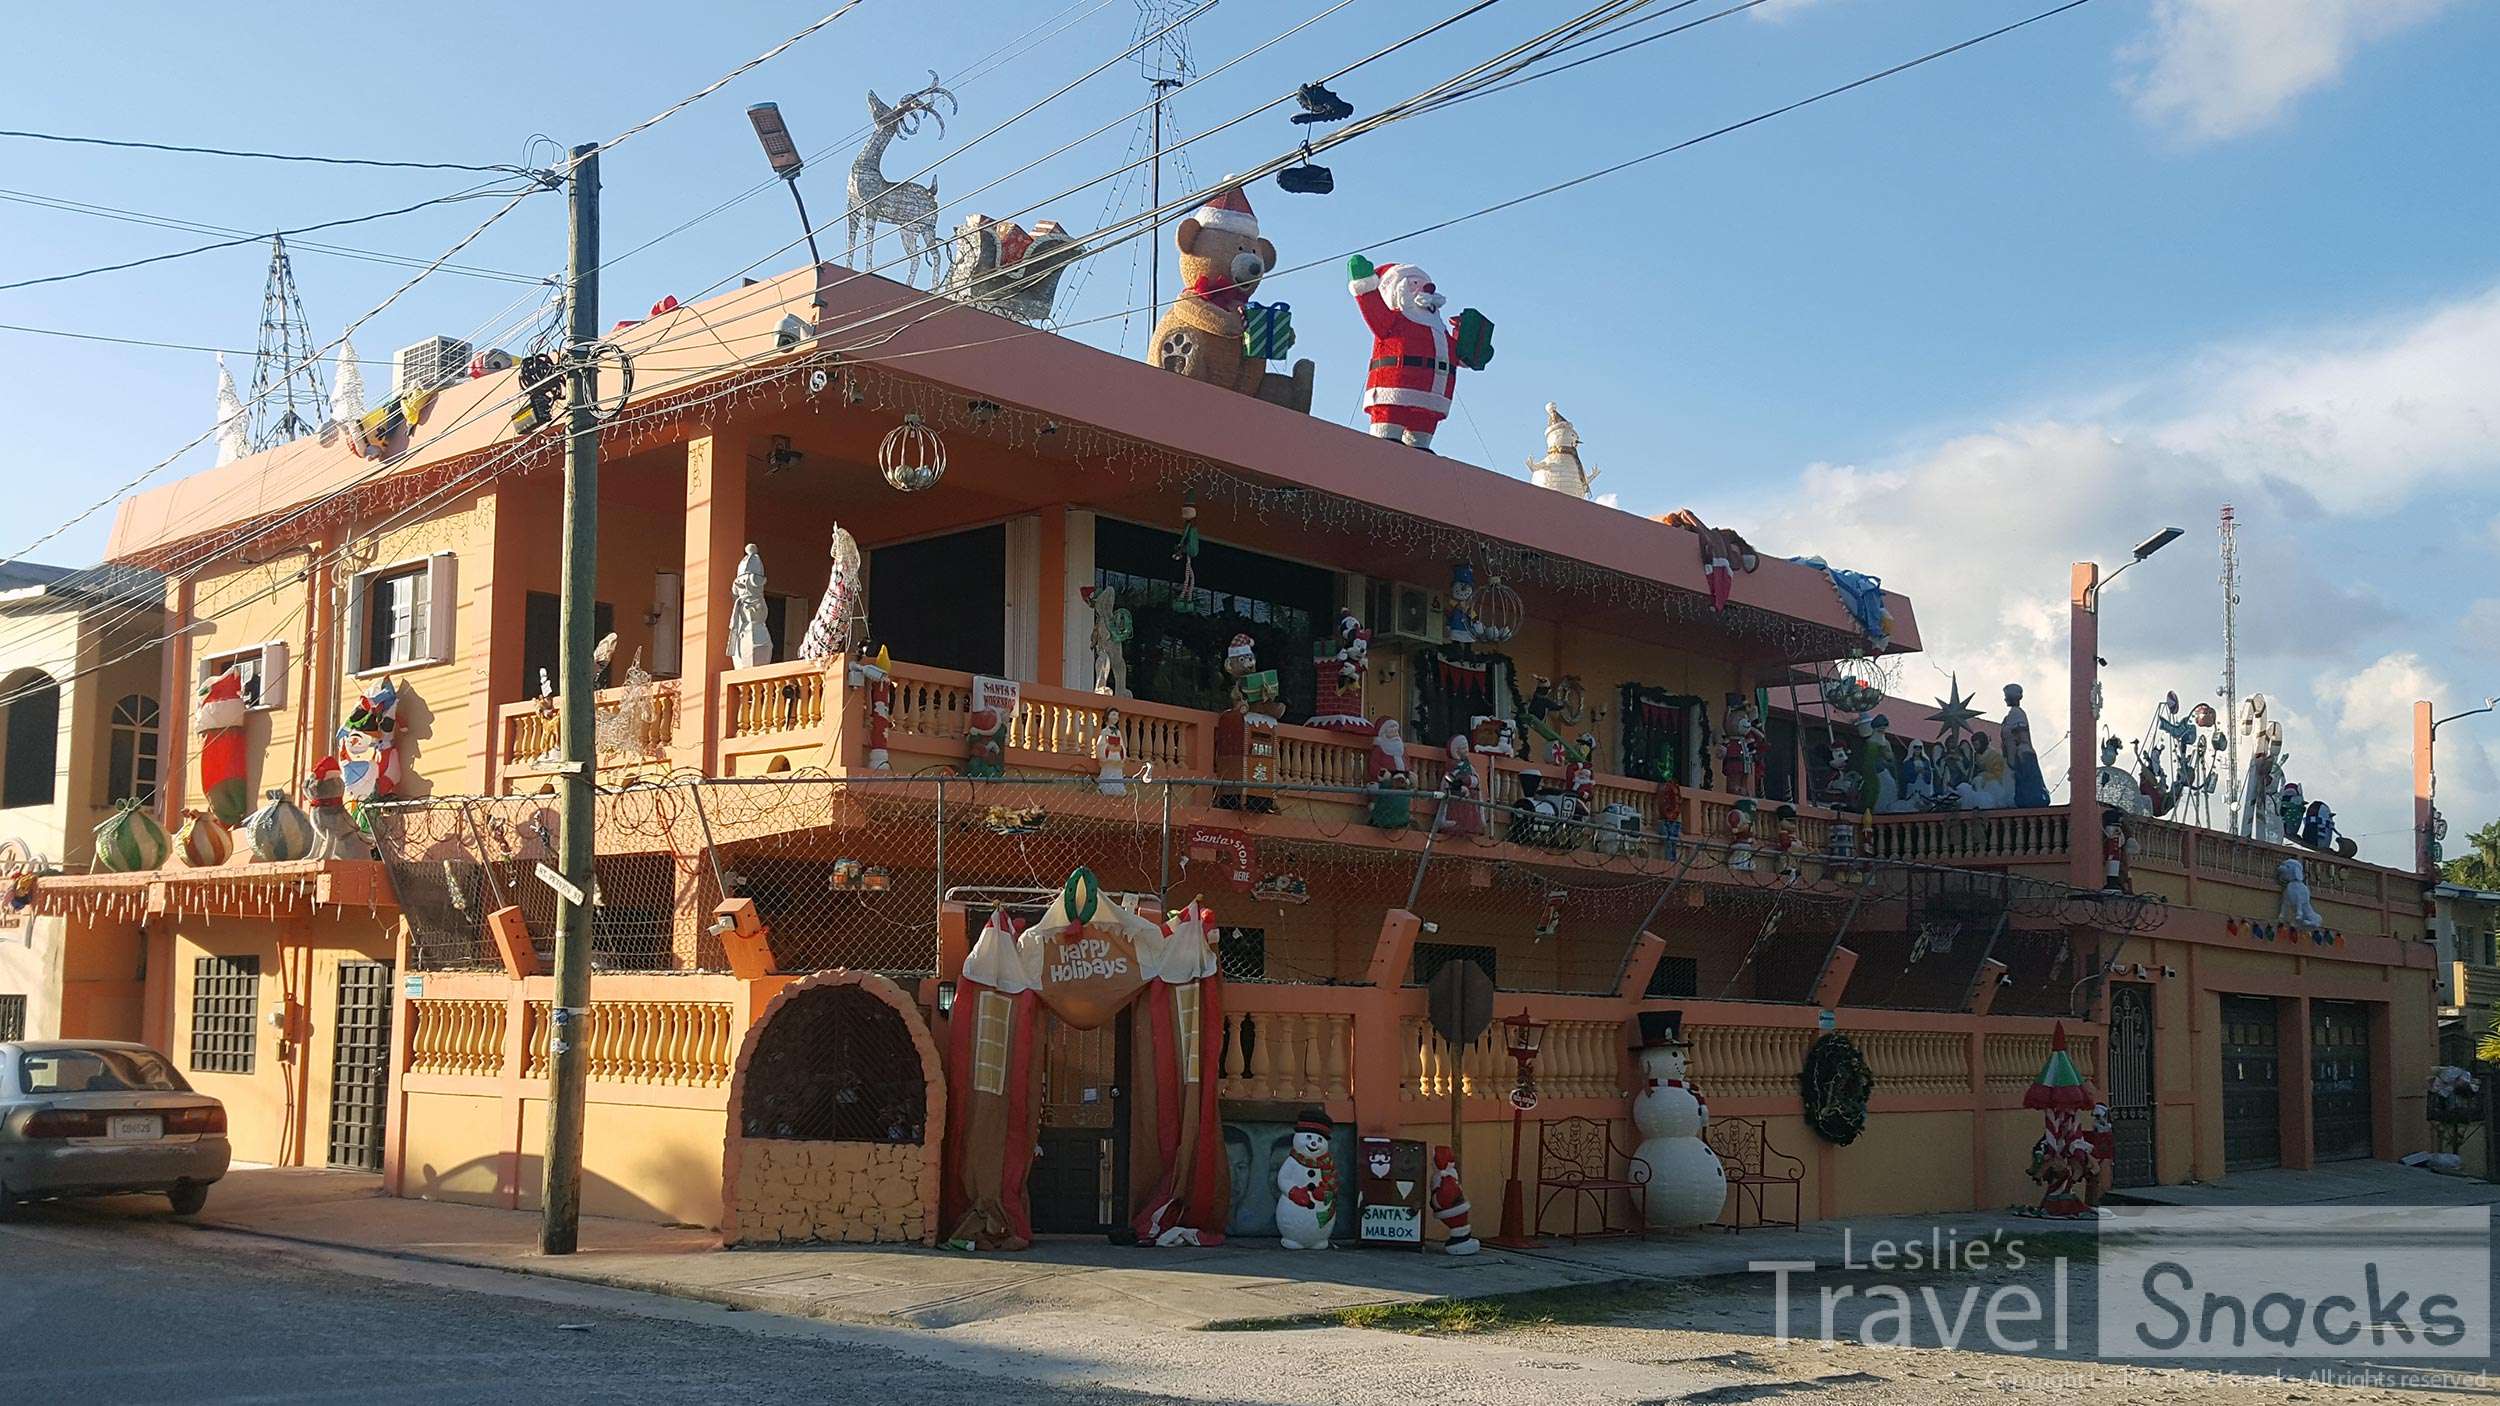 Some of the houses in Belize are over-the-top decorated for the holidays.